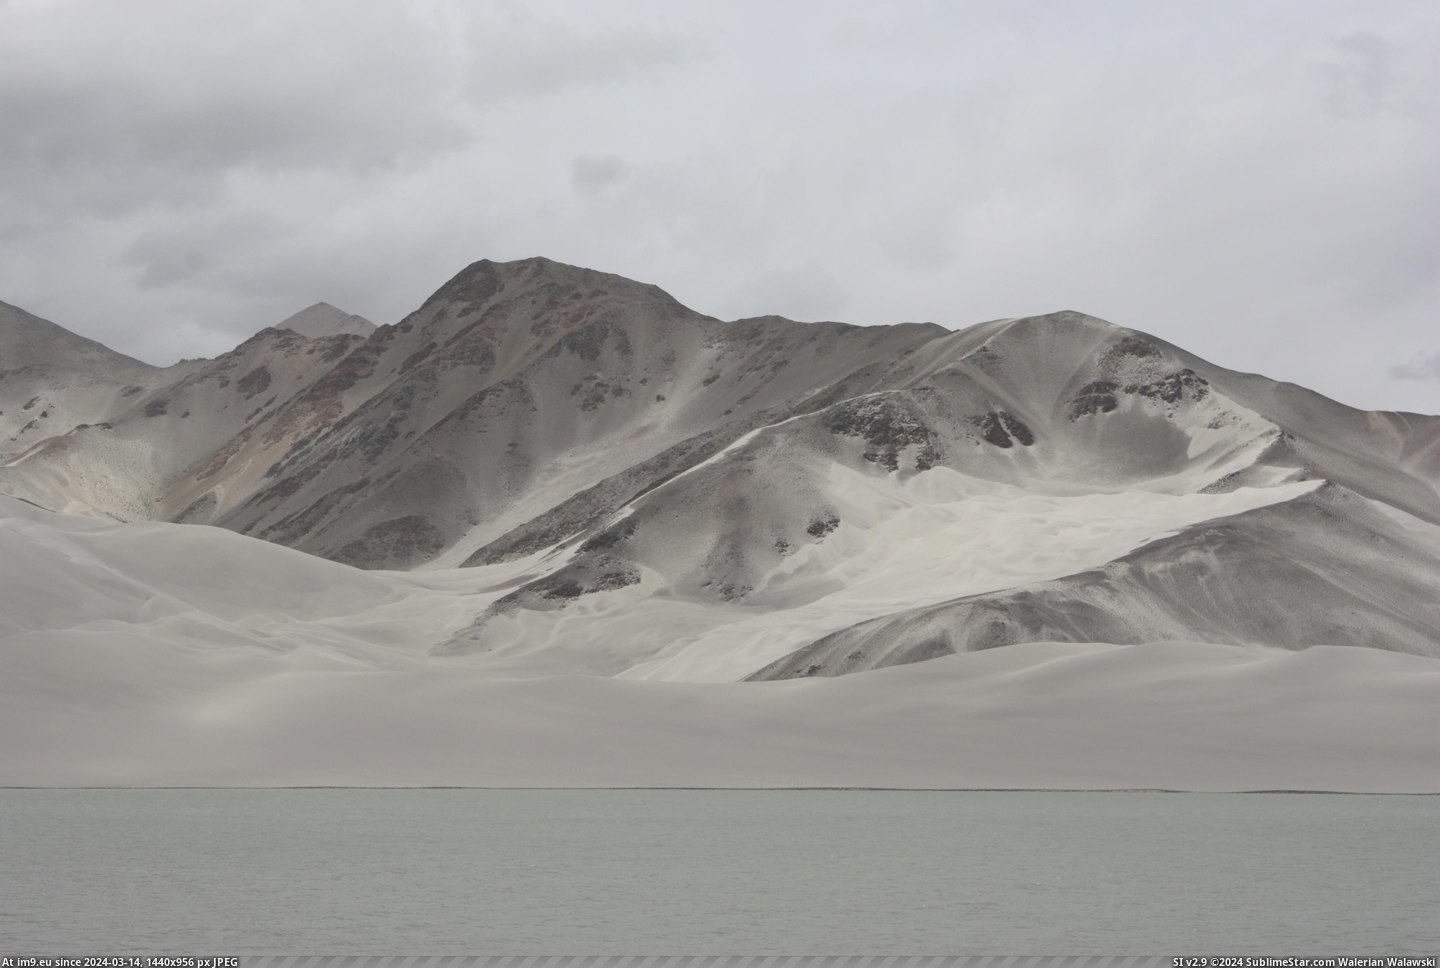 #White #Mountain #Province #4272x2848 #Xinjiang #China #Sand [Earthporn] [OC] White Sand mountain - Xinjiang Province, China [4272x2848] Pic. (Image of album My r/EARTHPORN favs))